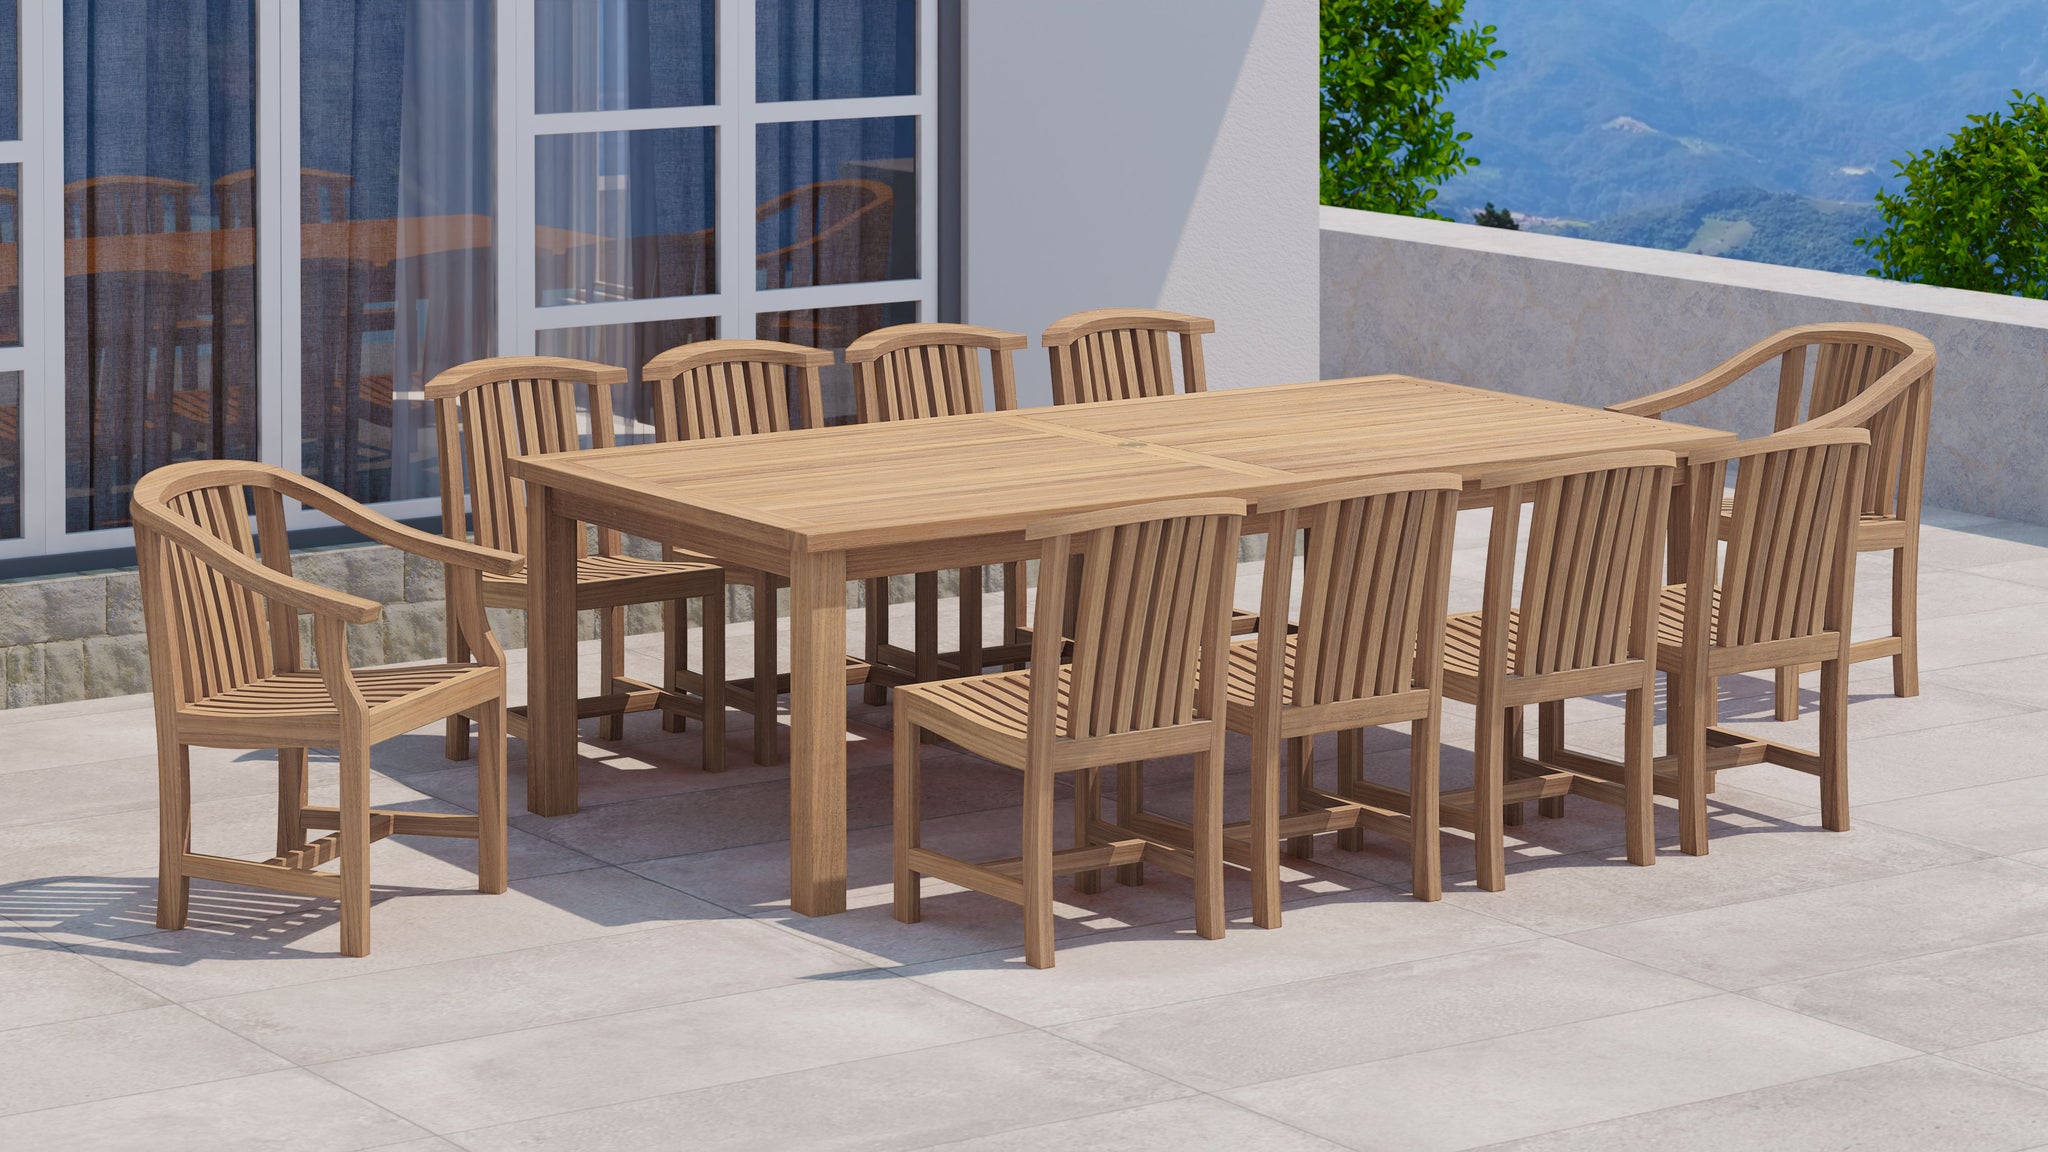 Rectangular Fixed Teak Dining Table with Winchester Teak Chairs